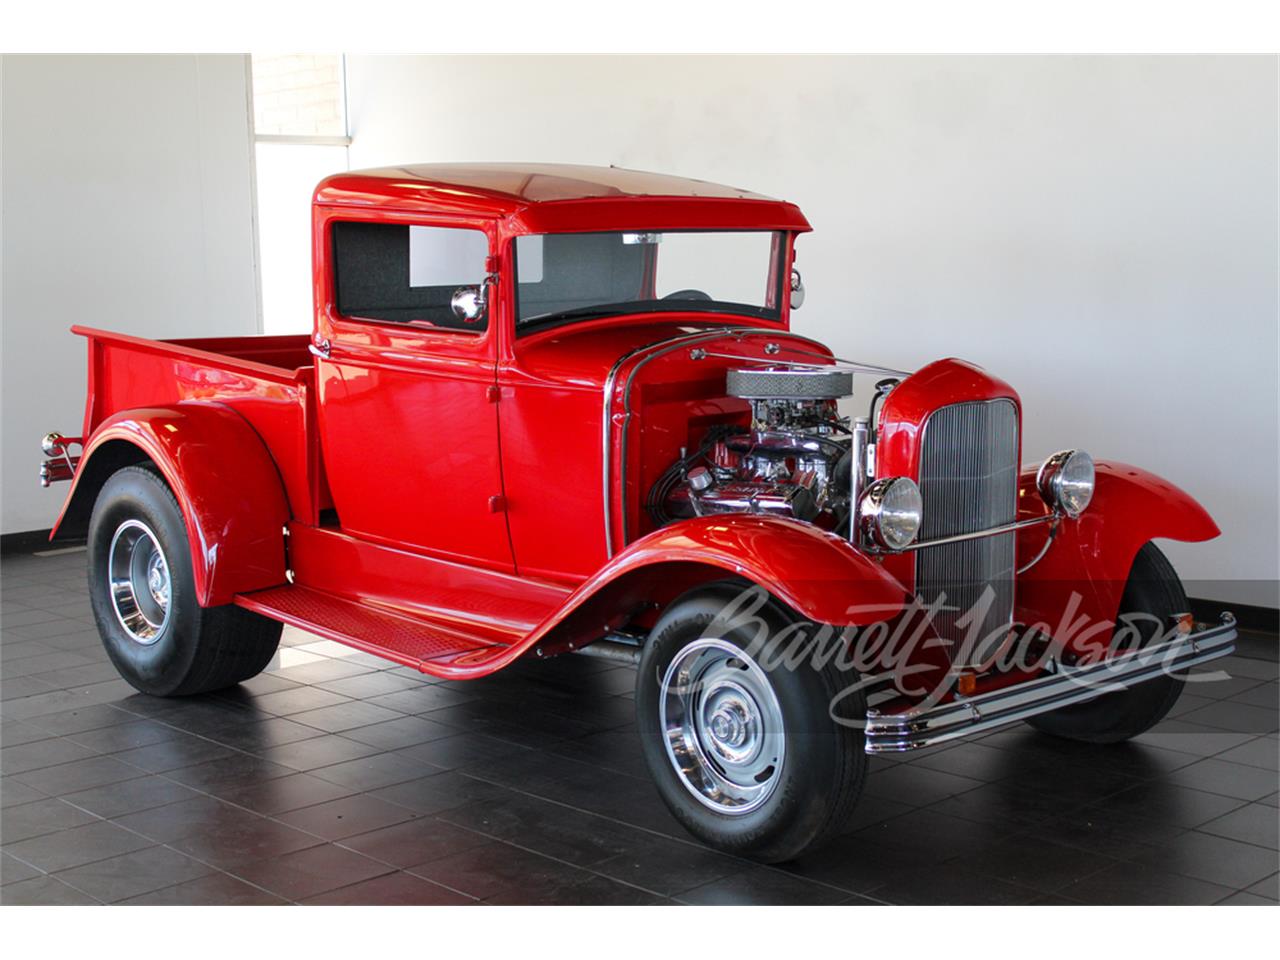 For Sale at Auction: 1931 Ford Custom in Scottsdale, Arizona for sale in Scottsdale, AZ